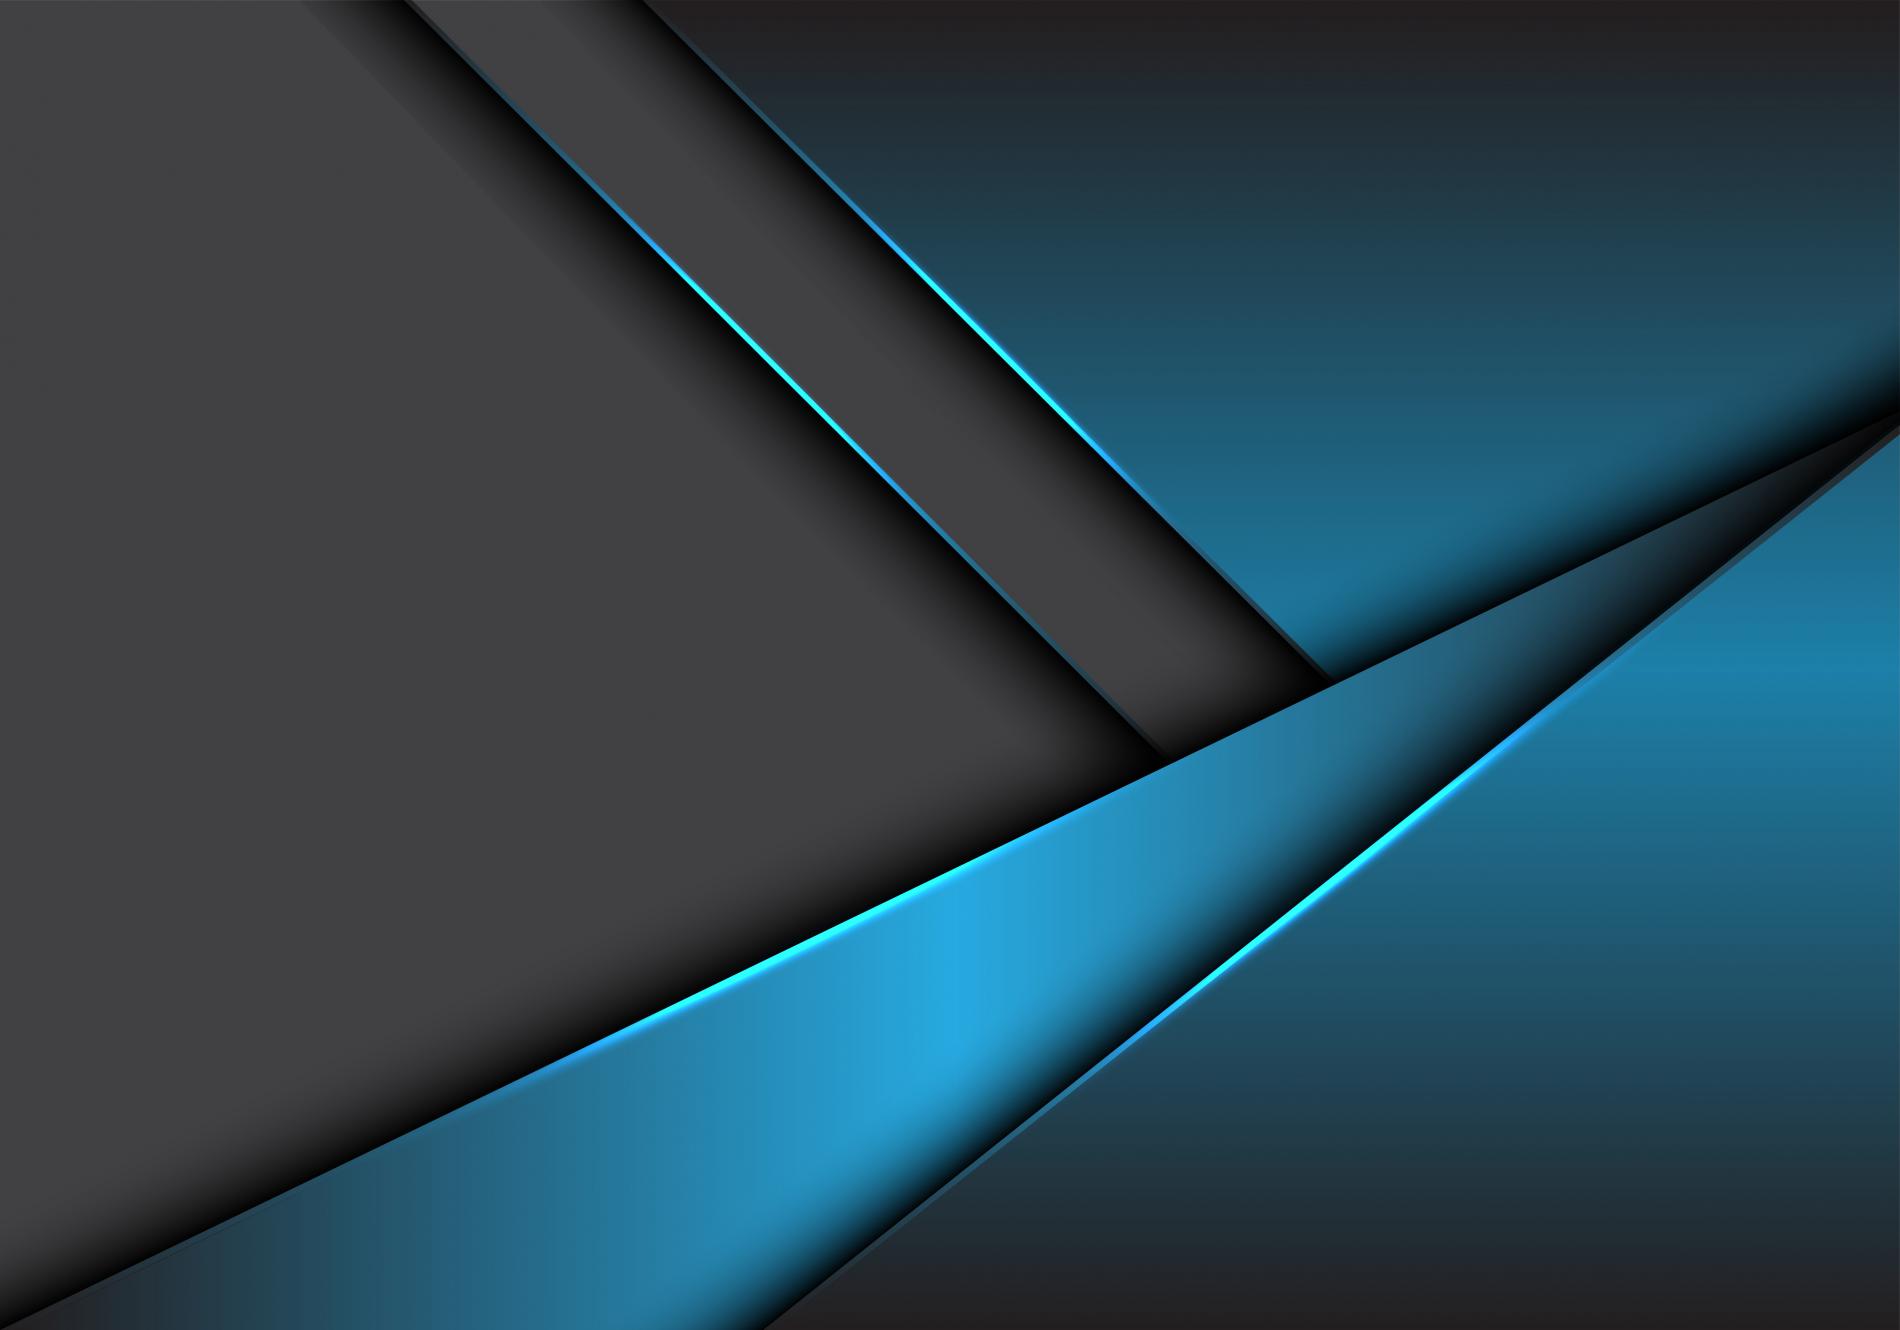 corporate blue and grey background diagonal shapes